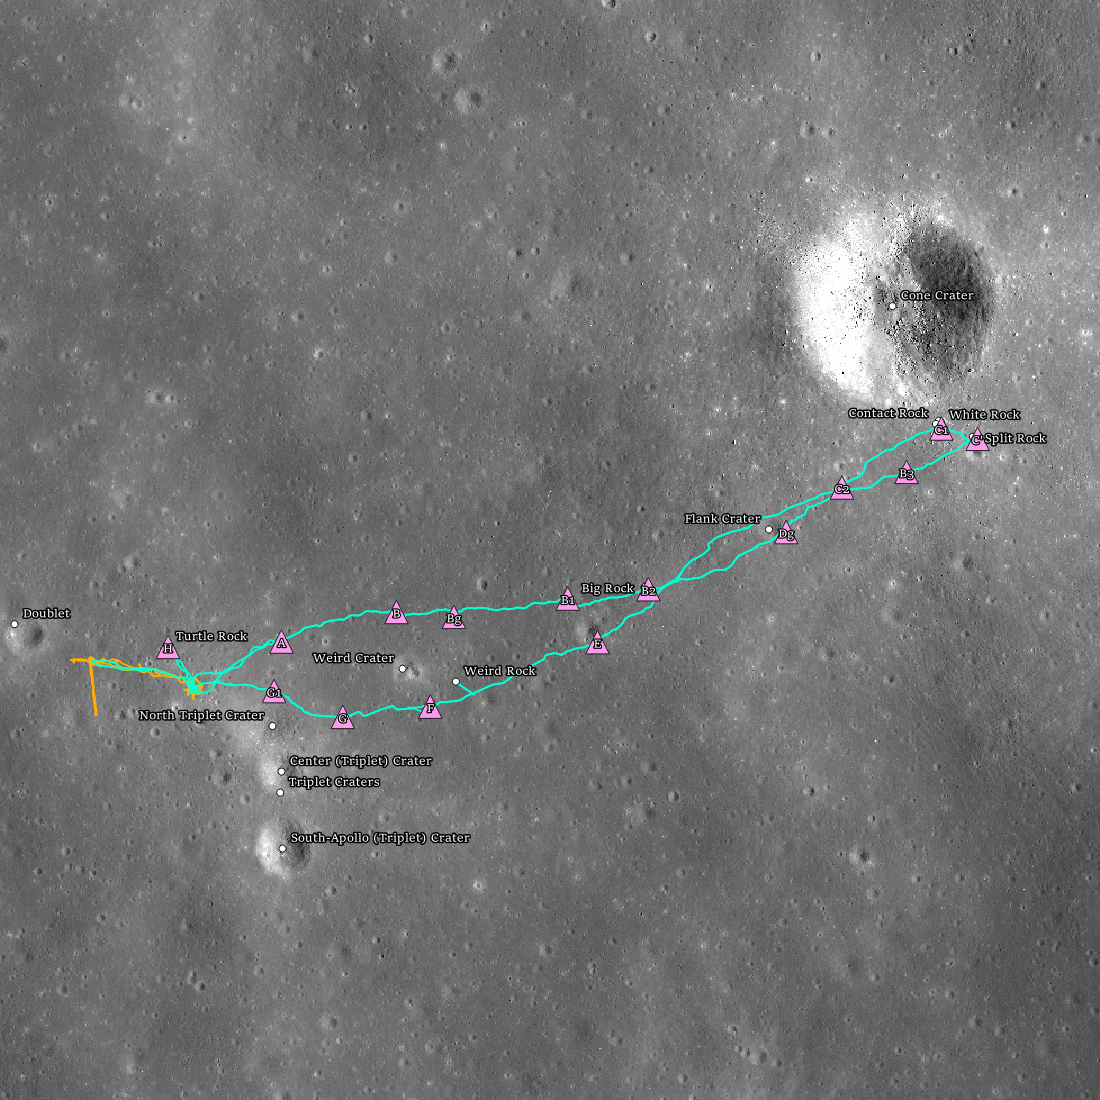 Apollo 14 landing site showing the two EVAs performed by the astronauts, including their journey to Cone crater.